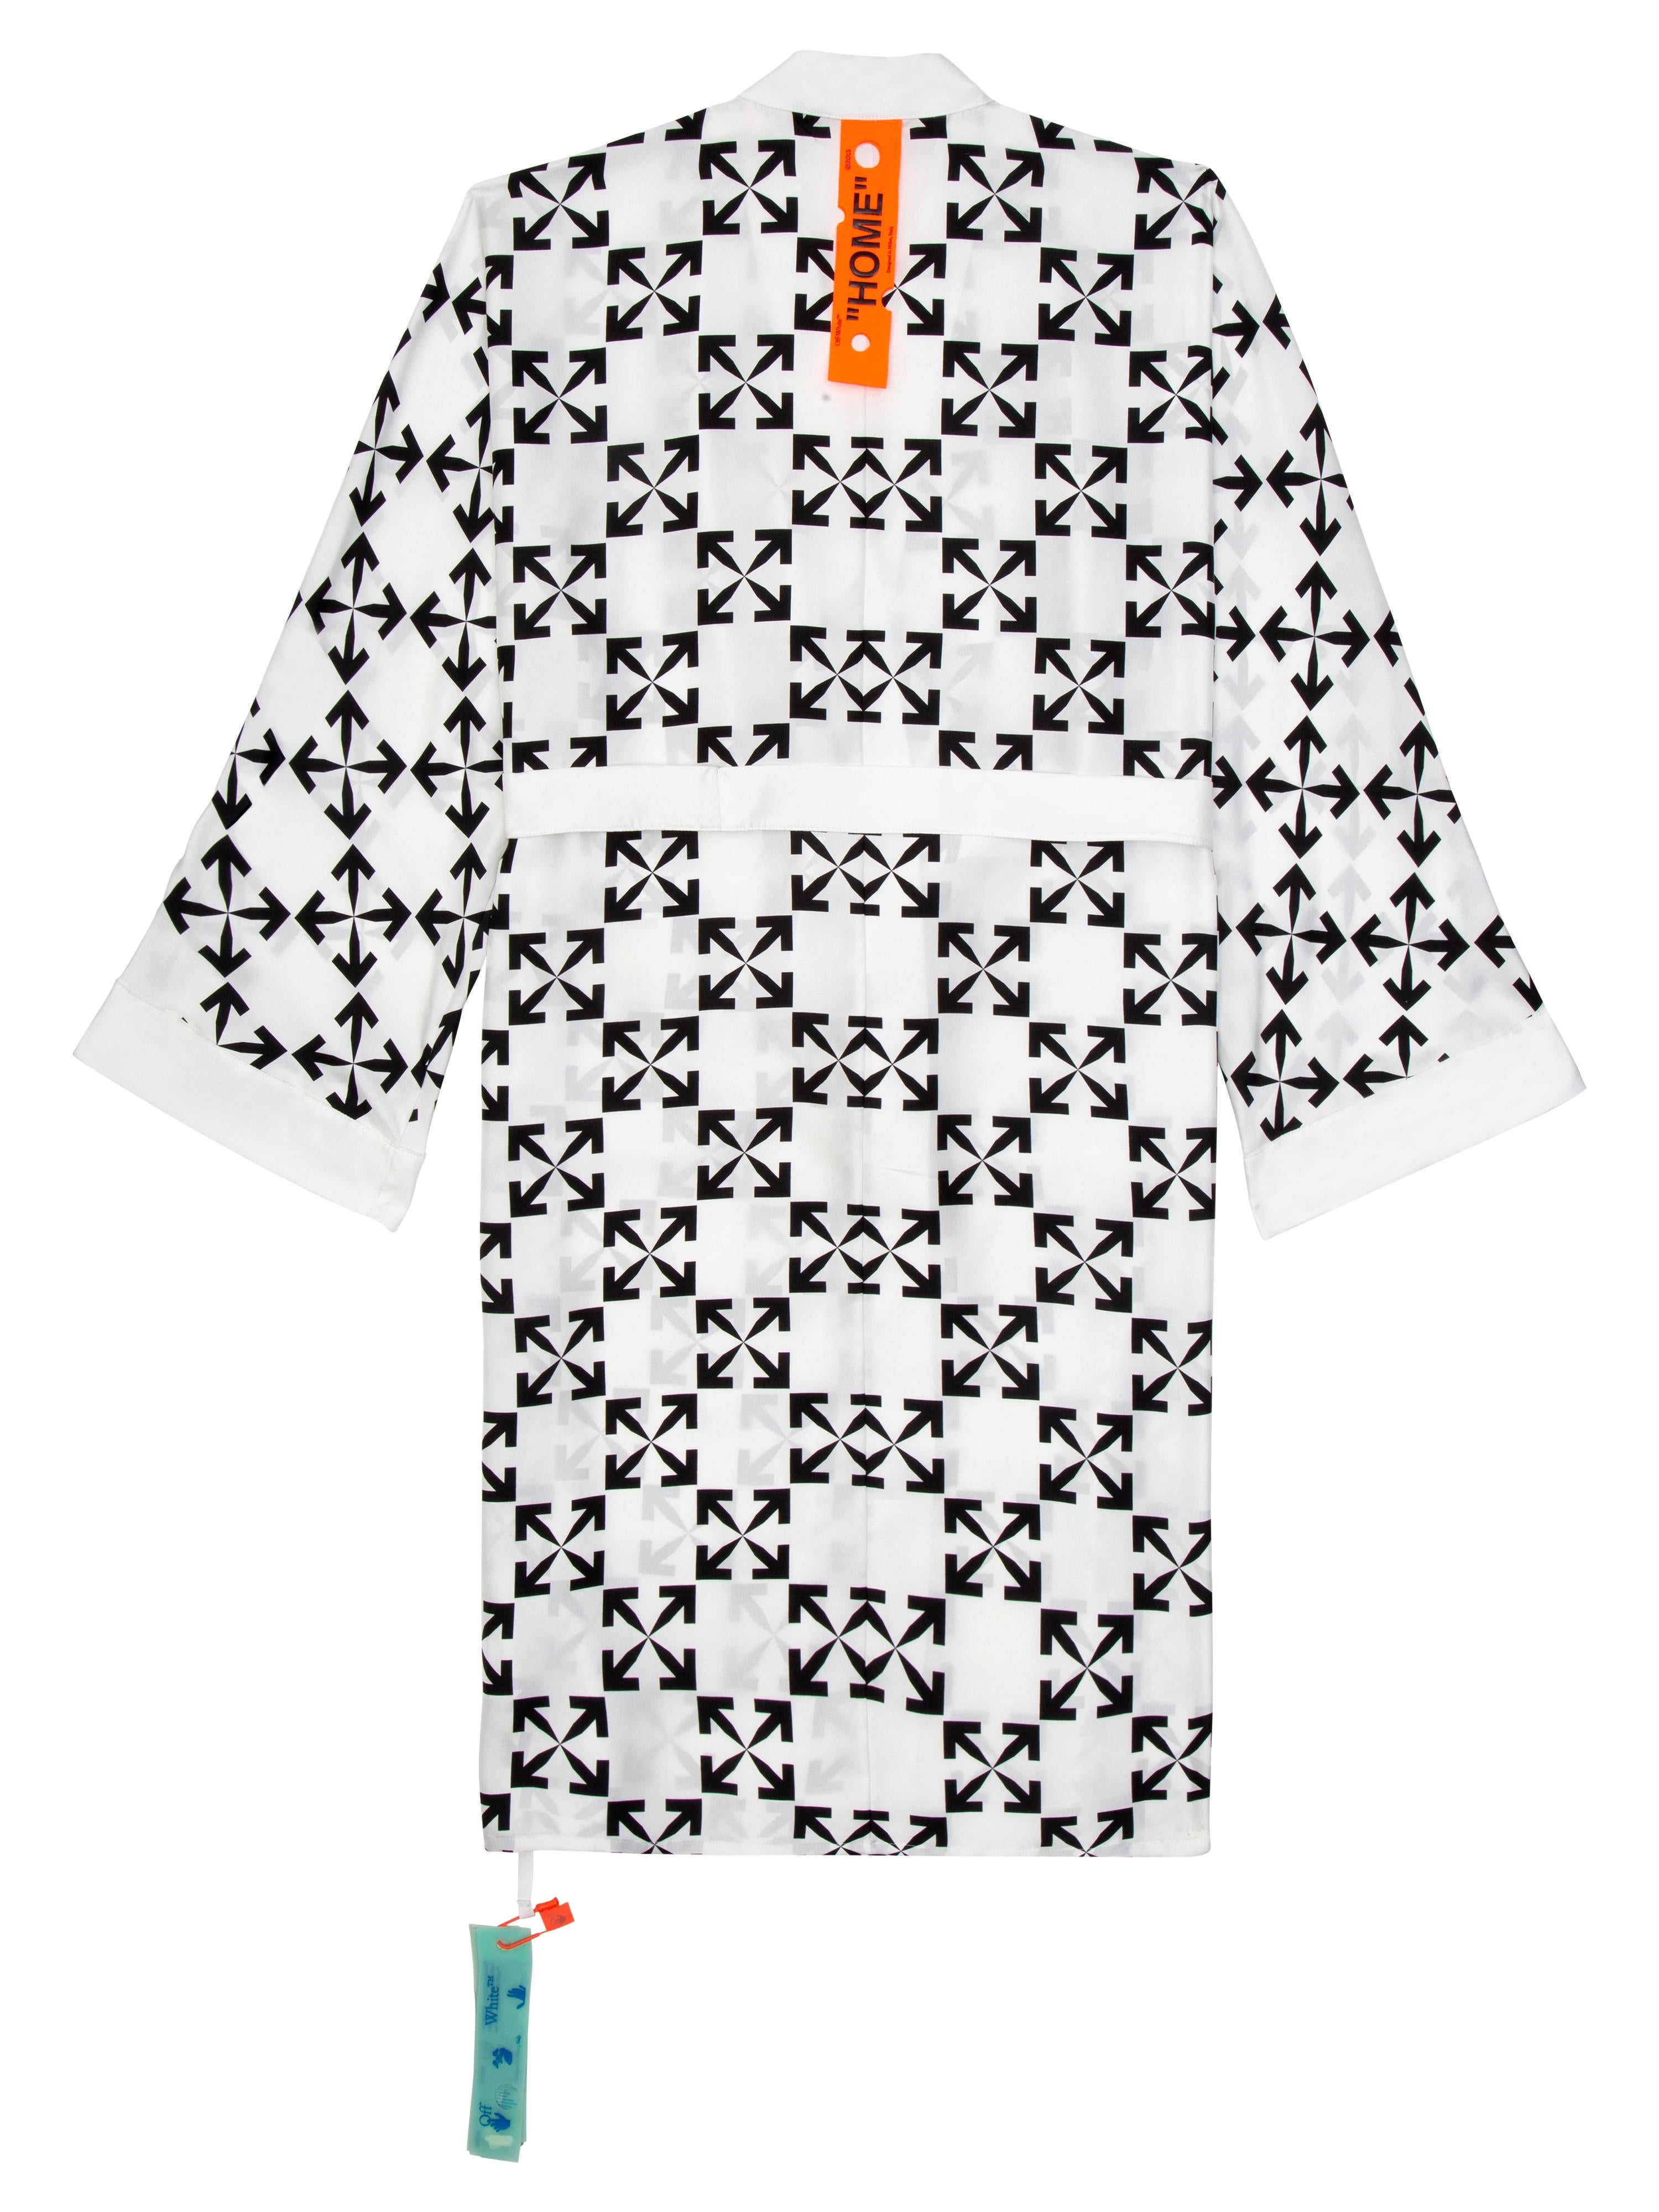 Silk Robe with belt in black arrow pattern on a white base. HOME orange loop on the back.
By Virgil Abloh
Size: Large
This item is only available to be purchased and shipped to the United States.
  